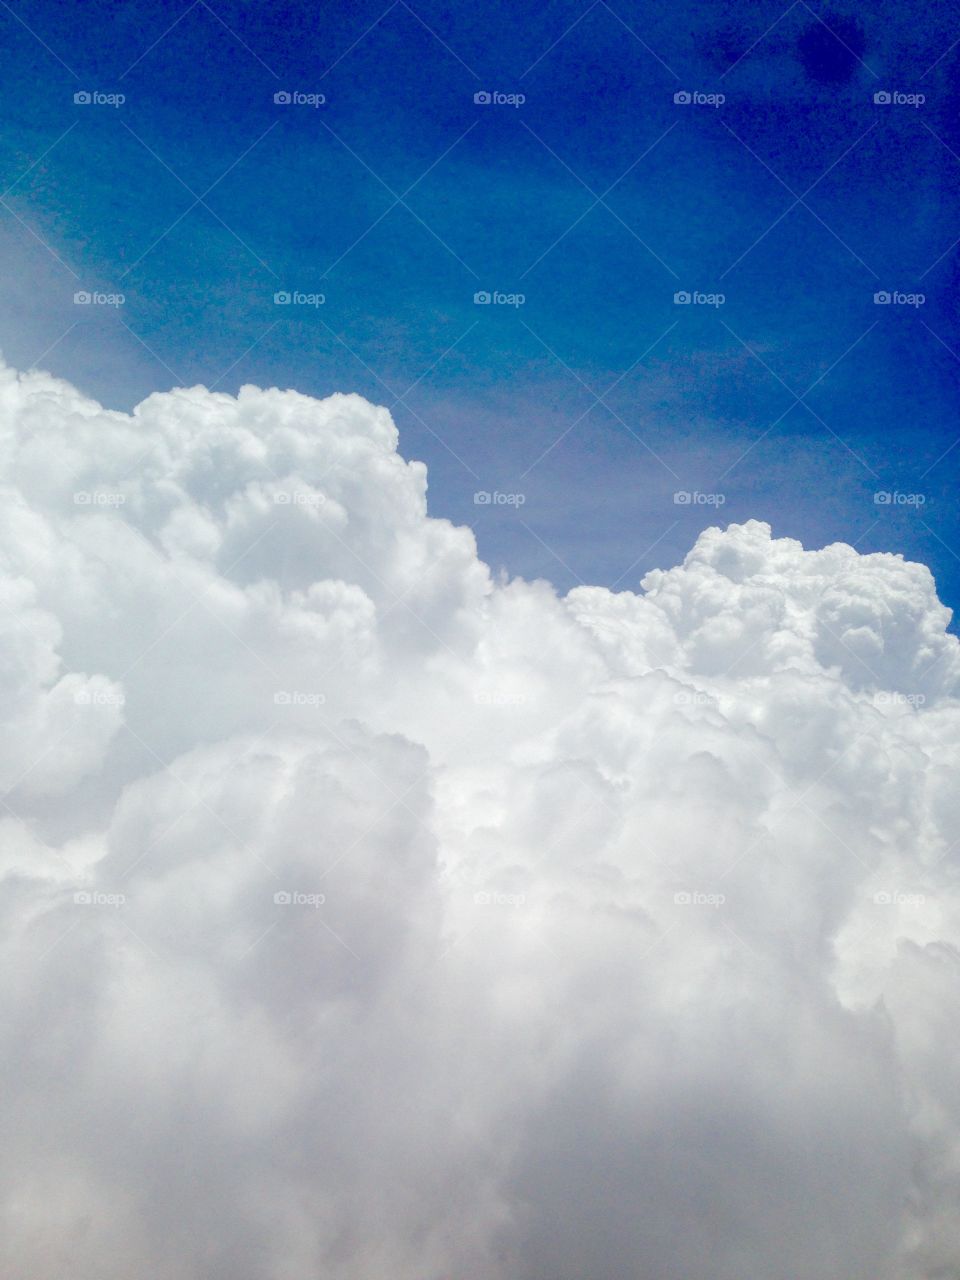 Fluffy Clouds. On the way to Costa Rica